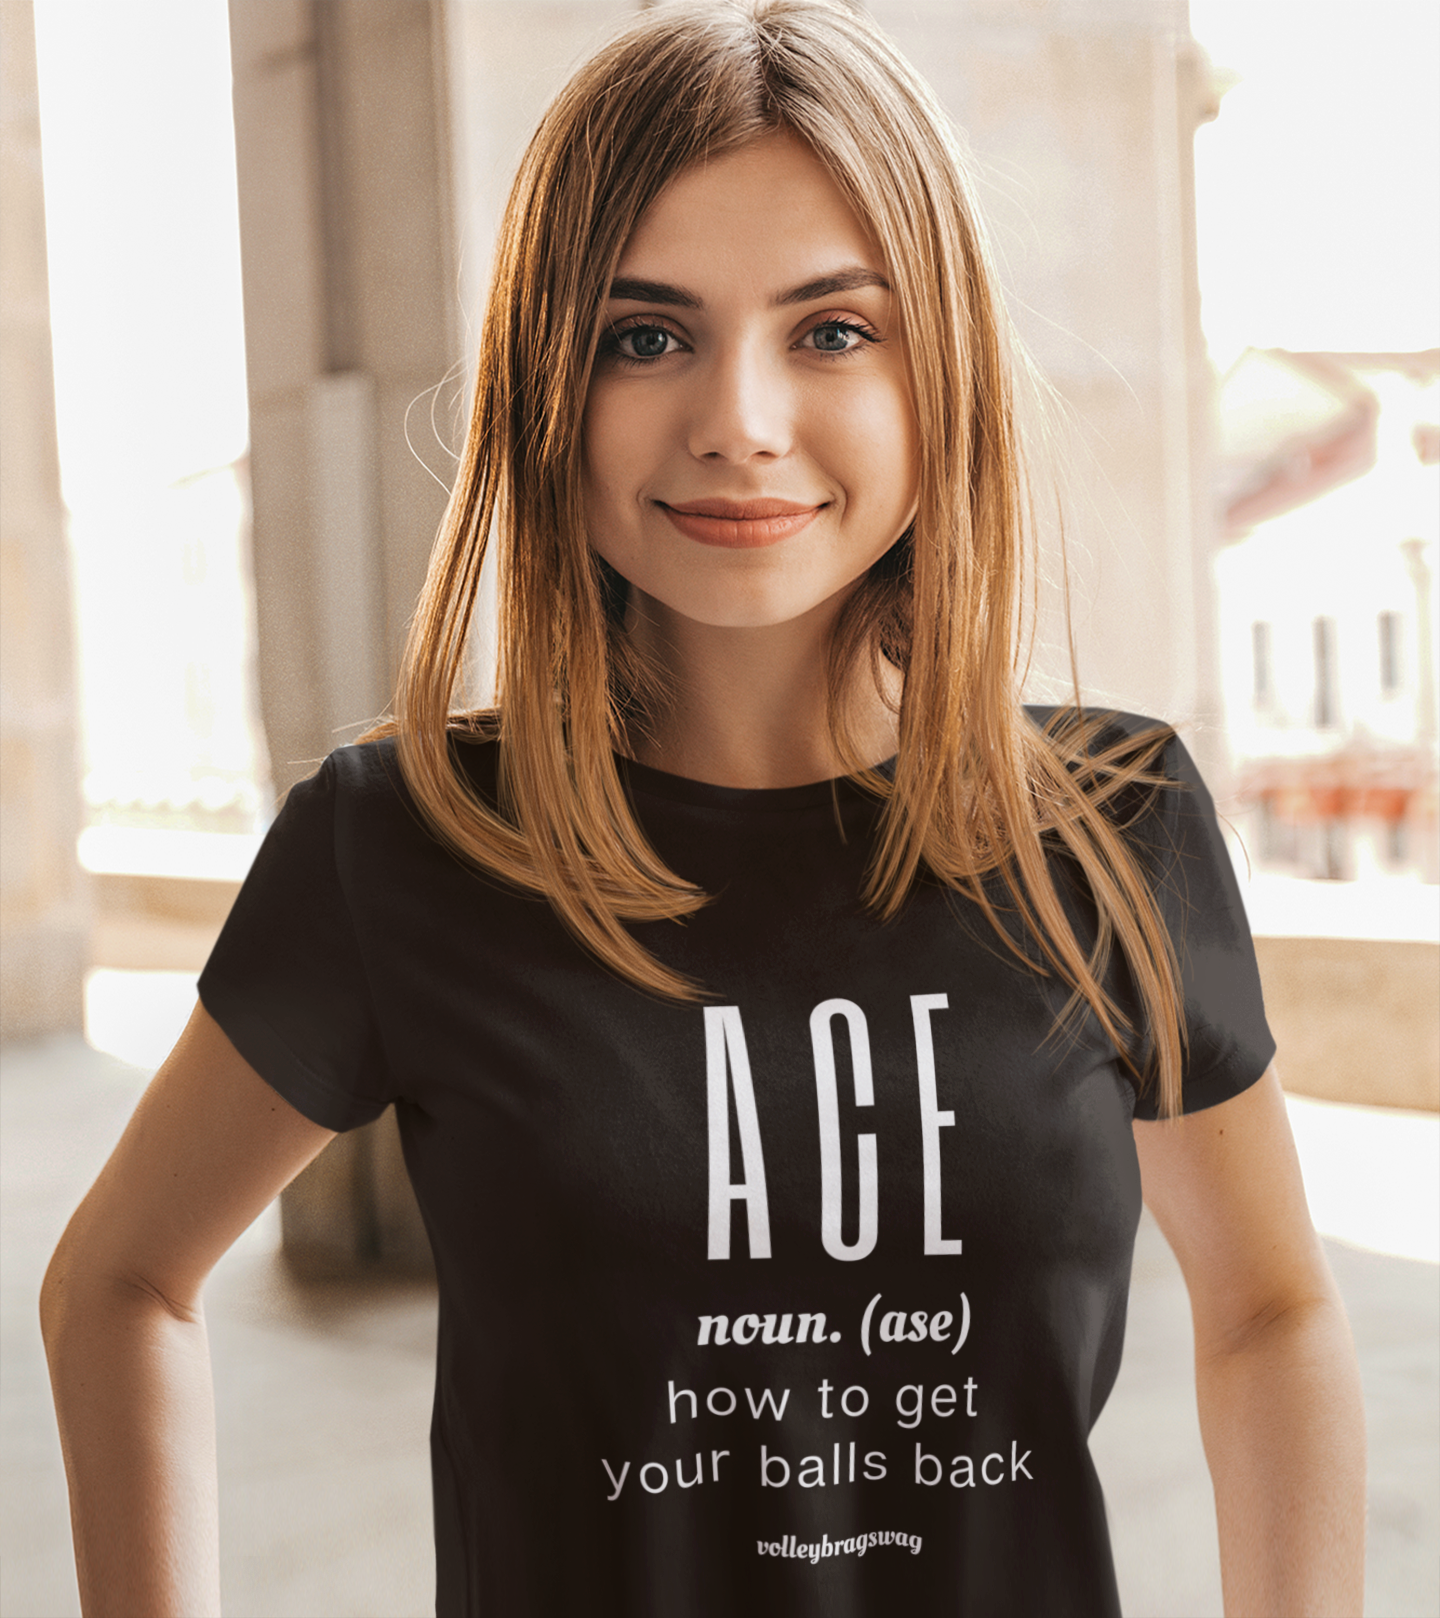 ACE-noun-how-to-get-your-balls-back volleyball shirt. April Chapple, Launches a Hilarious Volleyball T-shirt Line With Fun Tongue-in-Cheek Designs sure to make players and enthusiasts laugh.